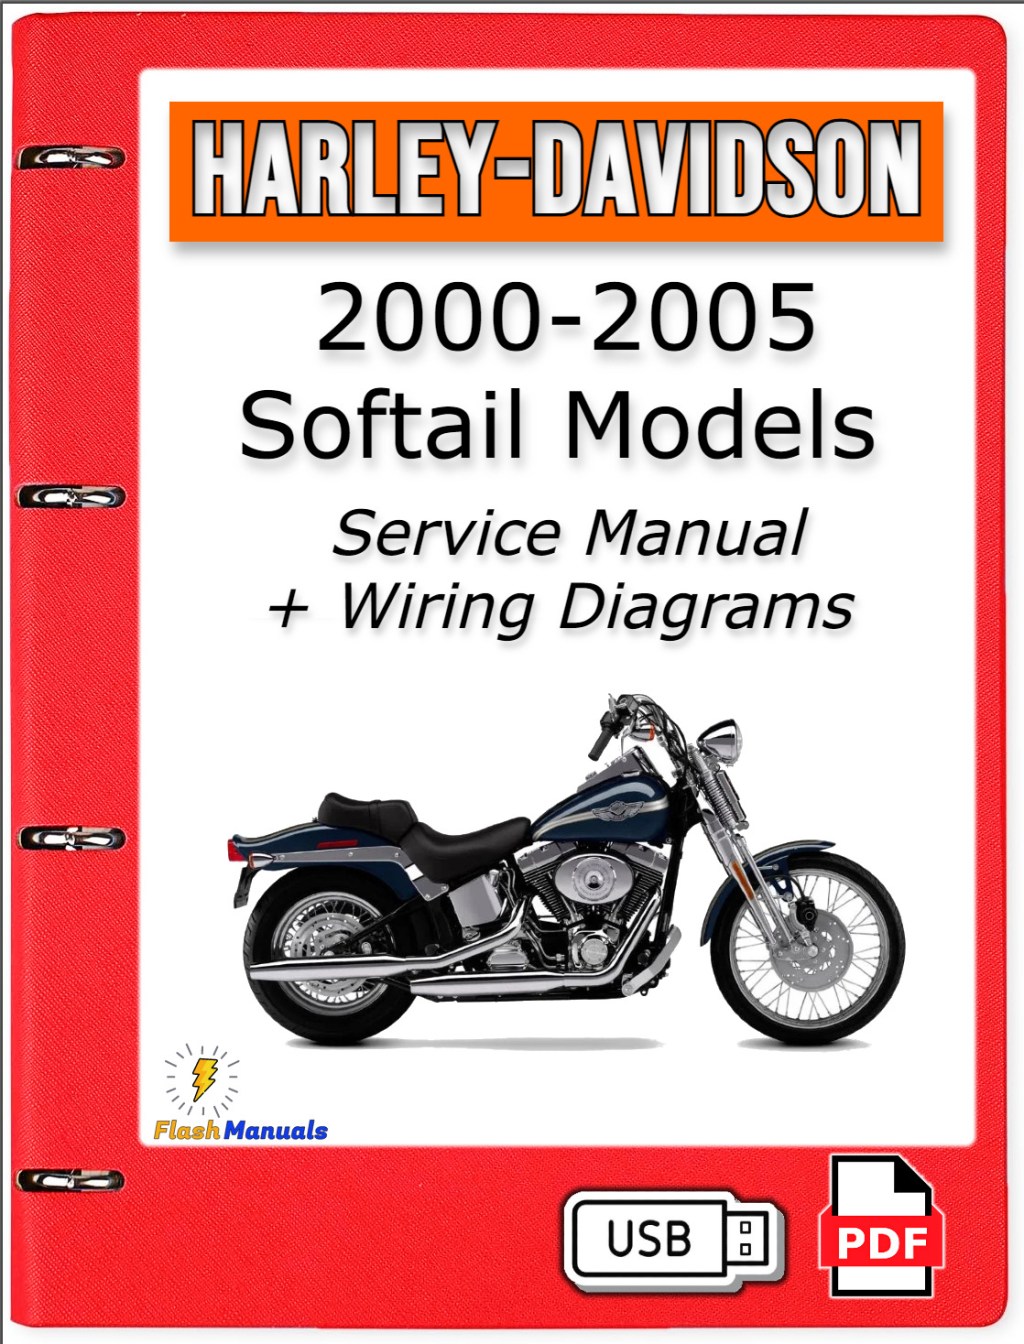 Picture of: – Harley Davidson Softail Models Service Manual + Wiring